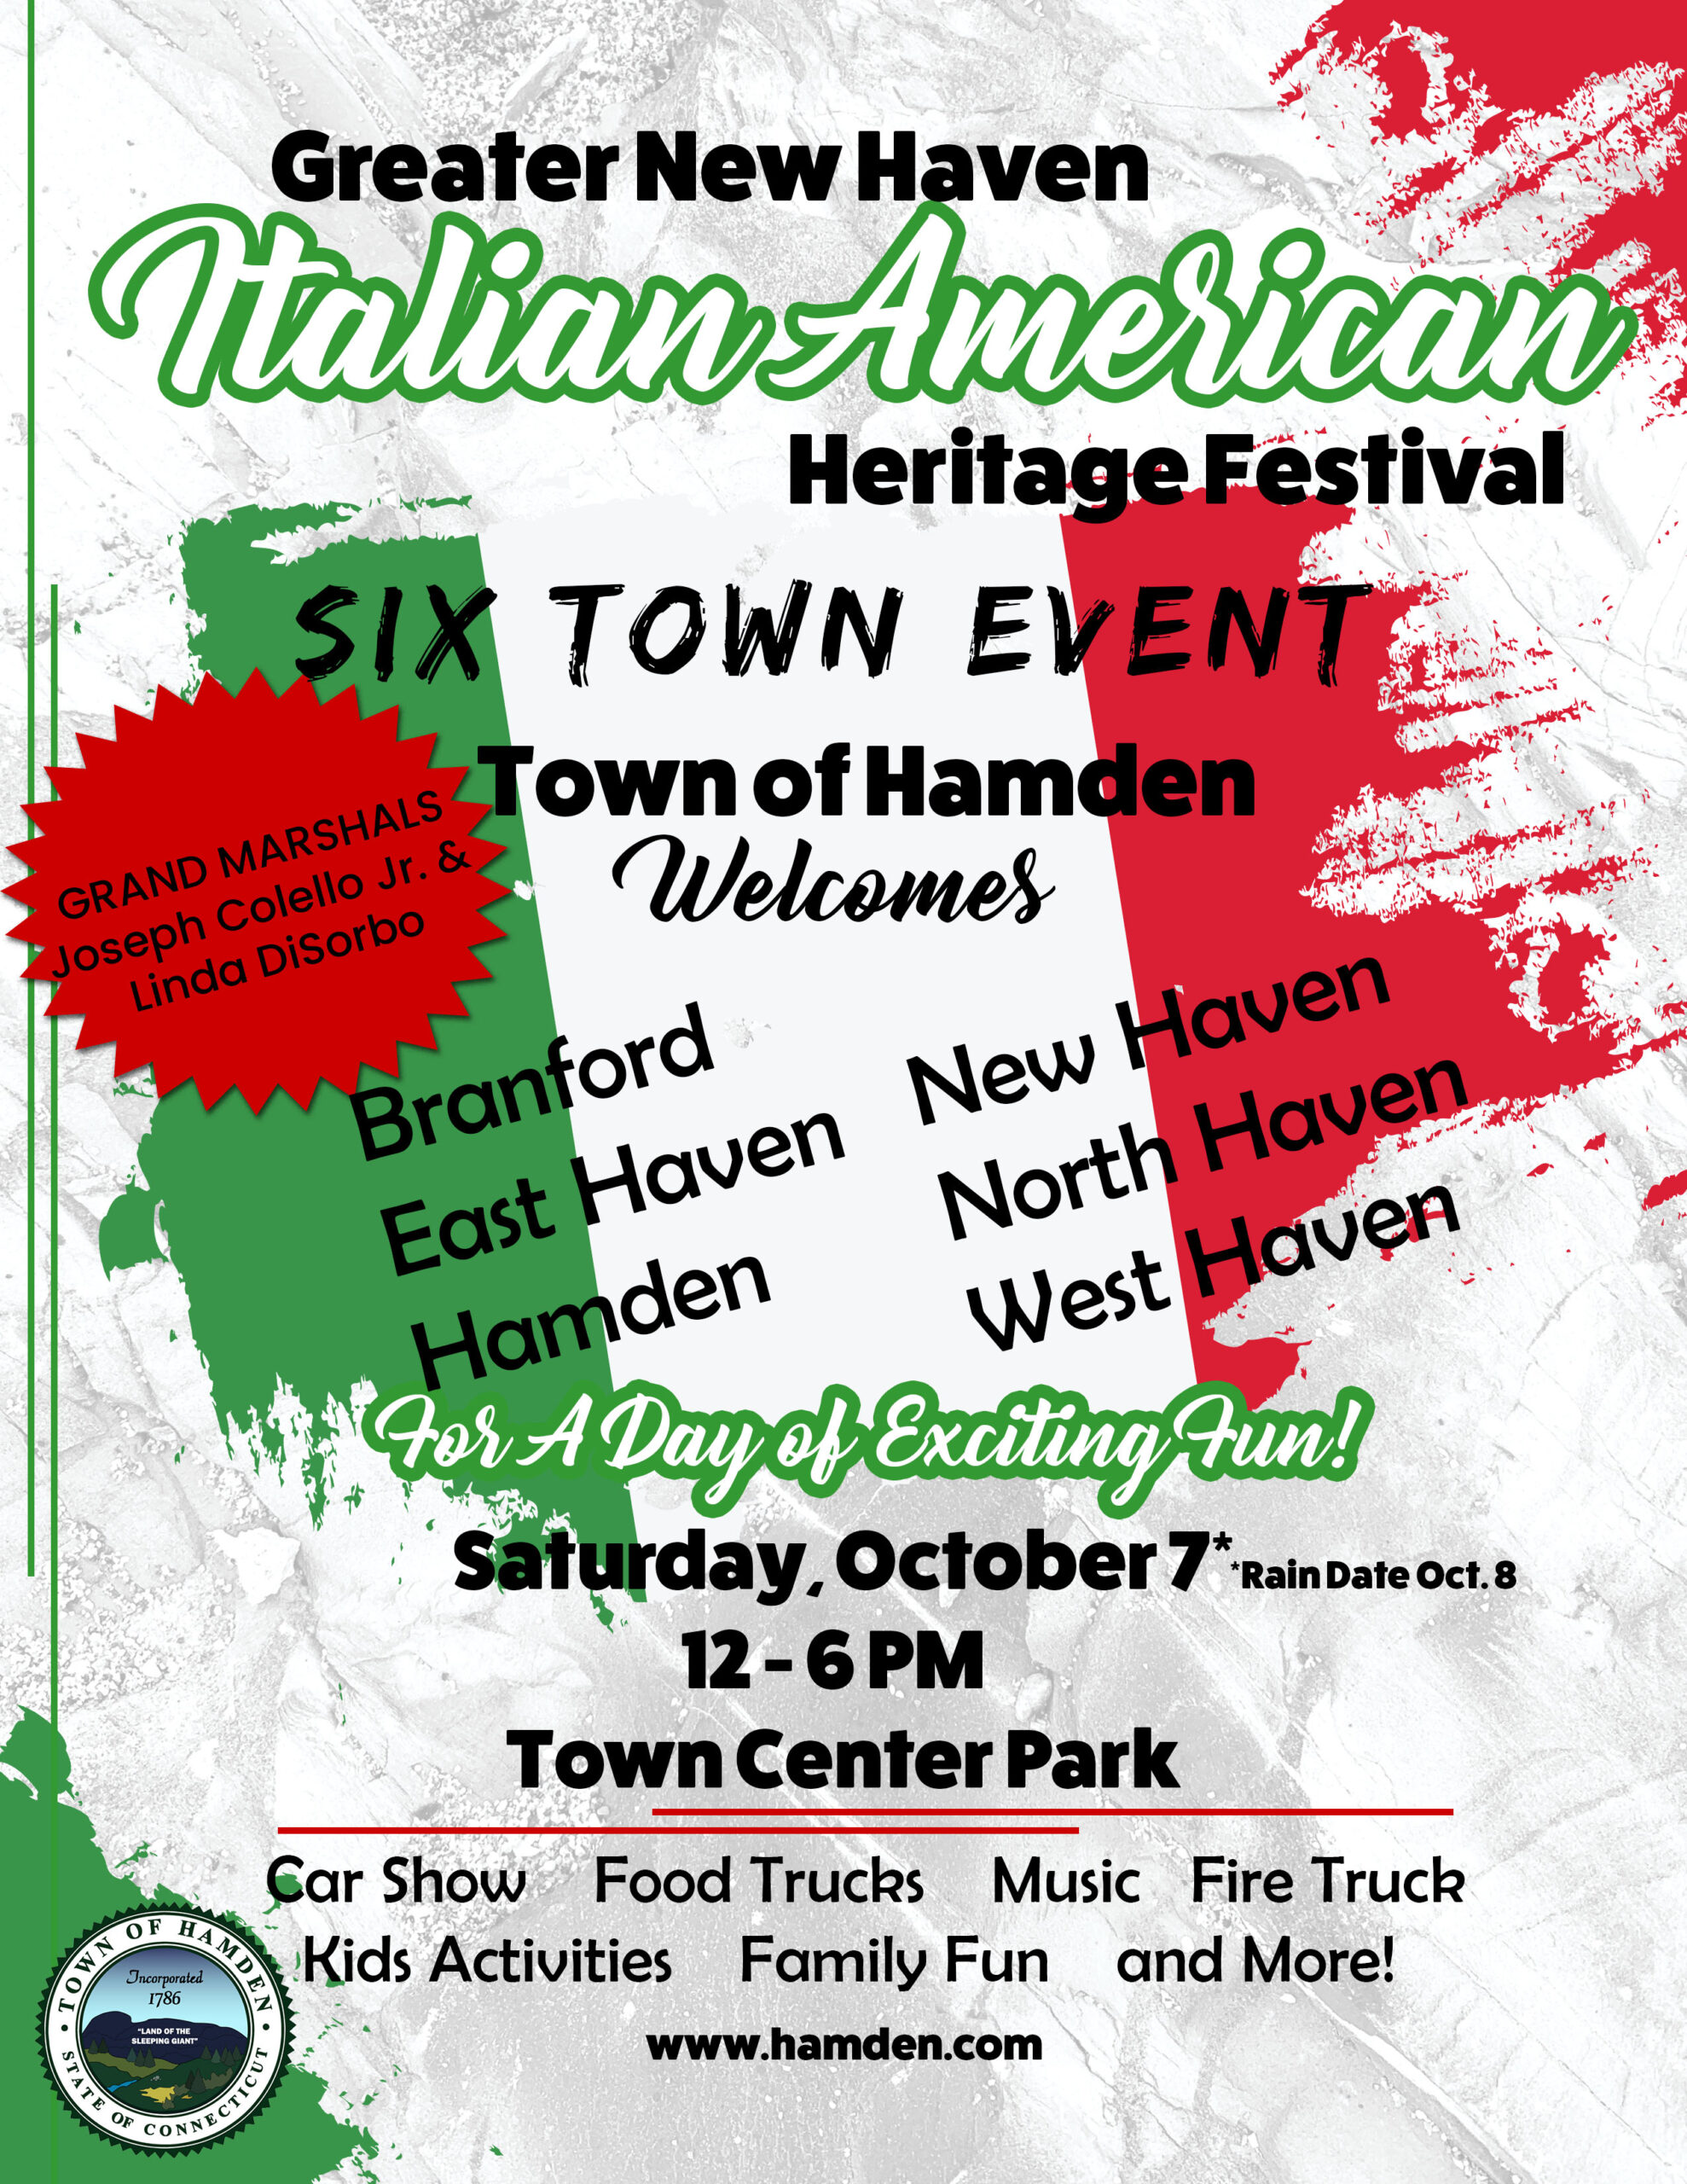 Greater New Haven ItalianAmerican Heritage Festival Visit New Haven CT